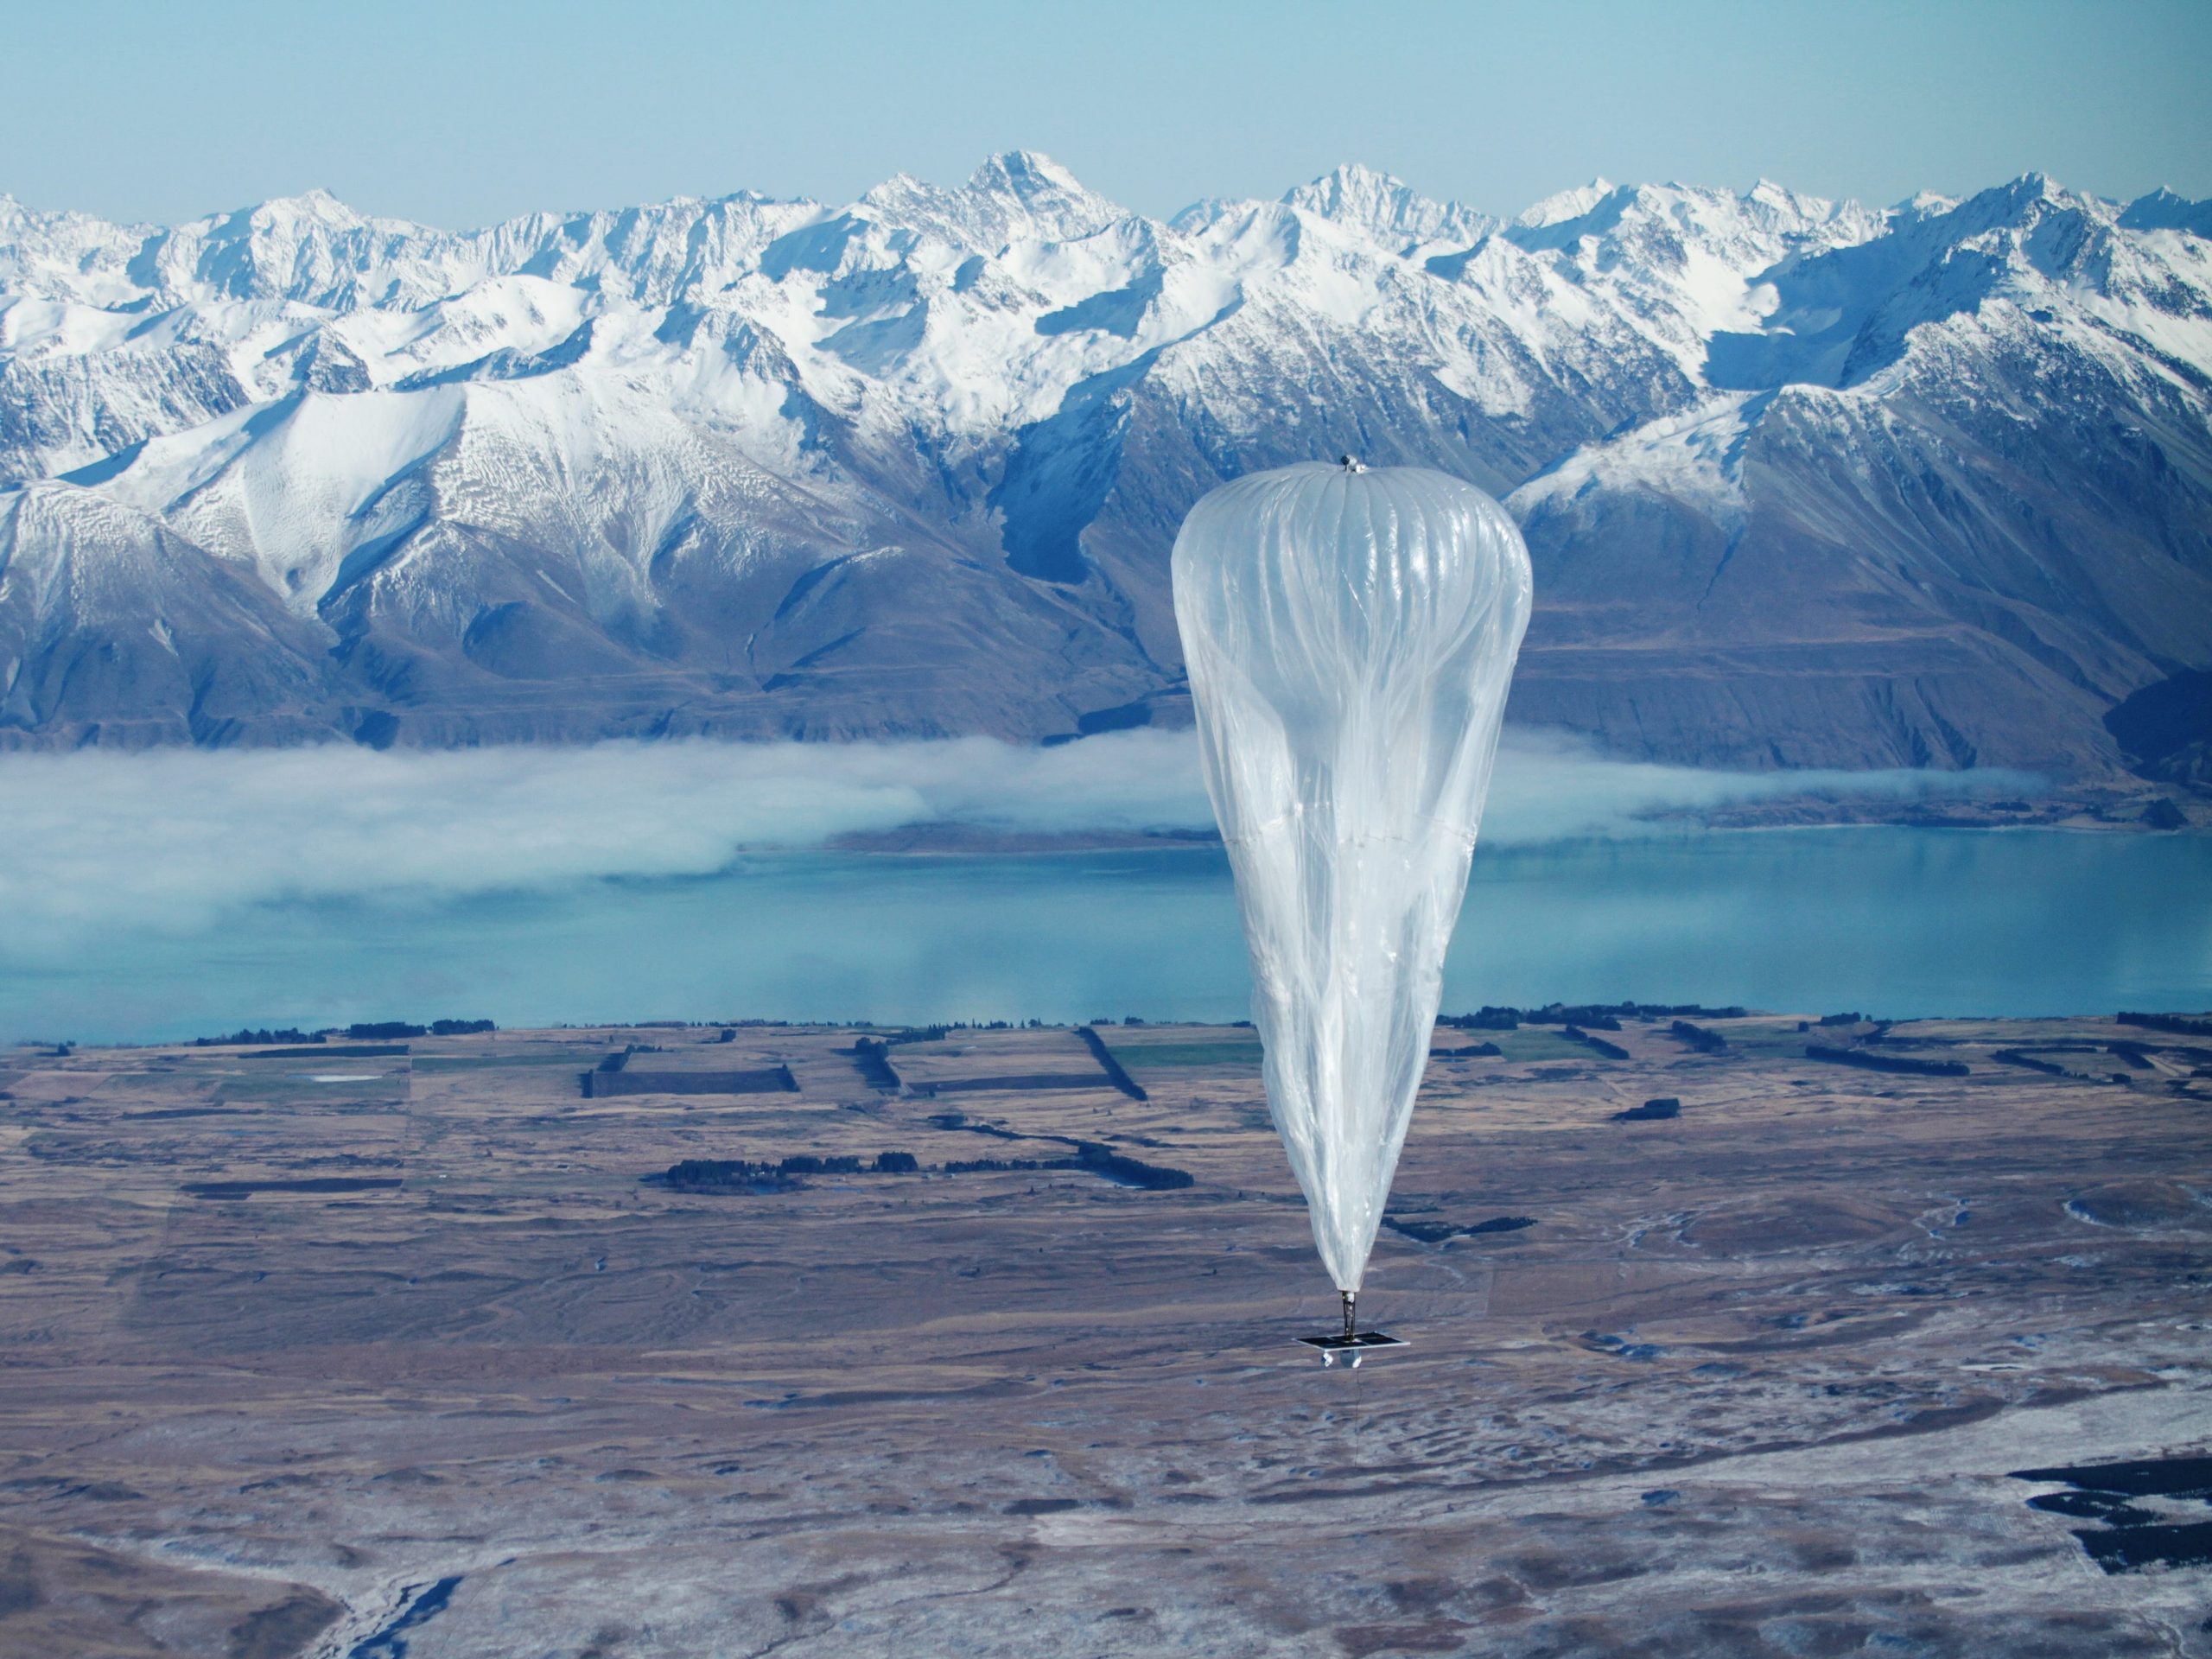 A Loon balloon floats through the skies of New Zealand